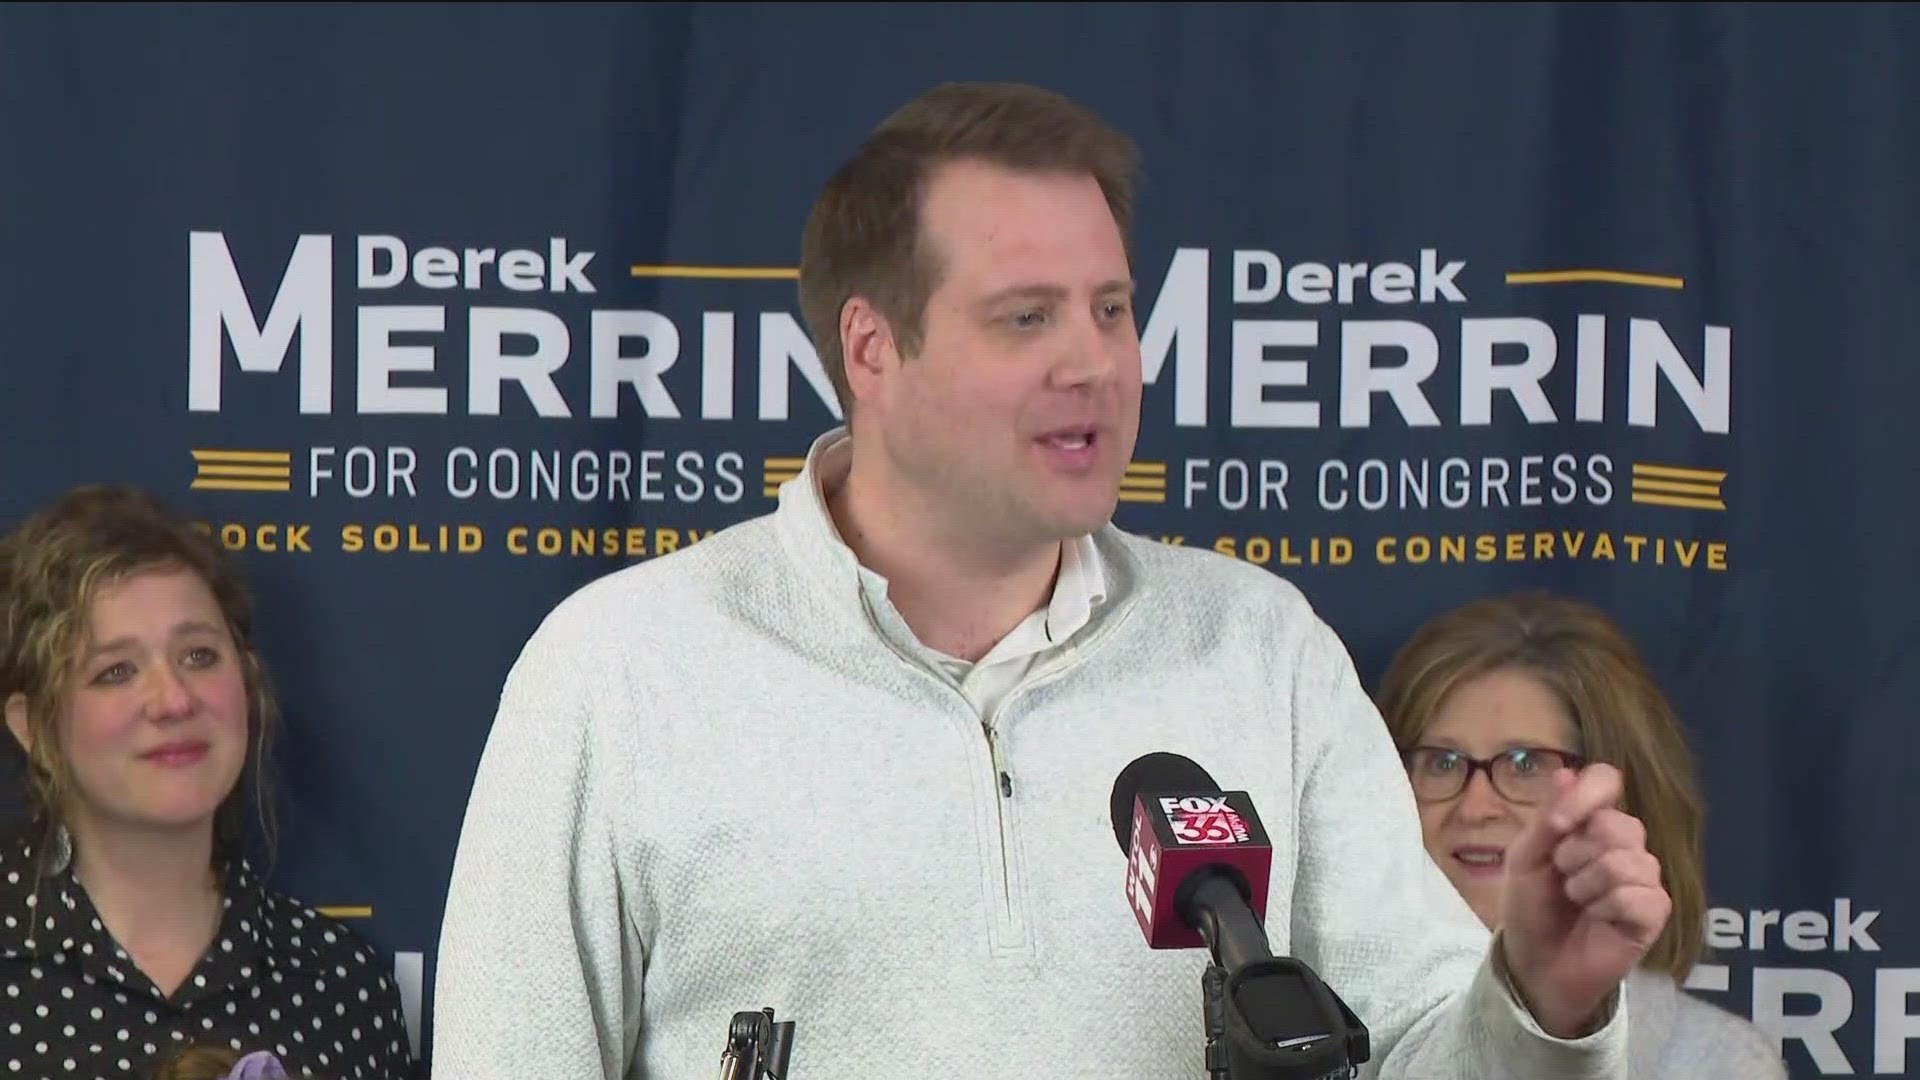 Derek Merrin beat Craig Riedel and Steve Lankenau for the nomination, according to unofficial election results. He will face incumbent Marcy Kaptur in November.